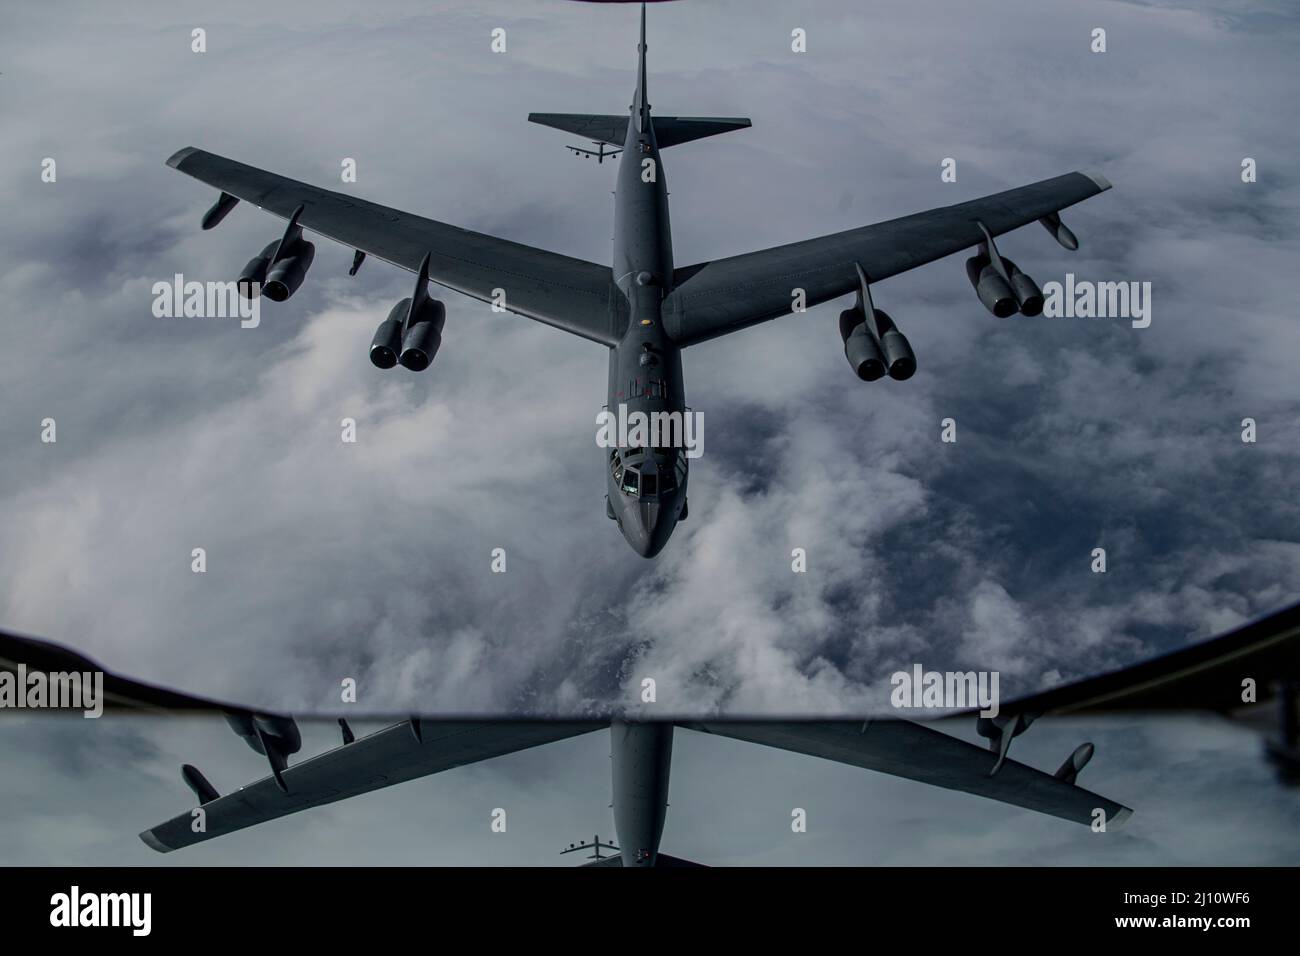 Gulf of Alaska, United States. 16 March, 2022. A U.S. Air Force B-52H Stratofortesses strategic bomber with the 2nd Bomb Wing, approaches a KC-135R Stratotanker for aerial refueling, during Operation Noble Defender March 16, 2022 over the Gulf of Alaska, USA. The NORAD exercise is part of recent military moves to deter Russian involvement in Ukraine.  Credit: SrA Joseph LeVeille/U.S. Air Force/Alamy Live News Stock Photo